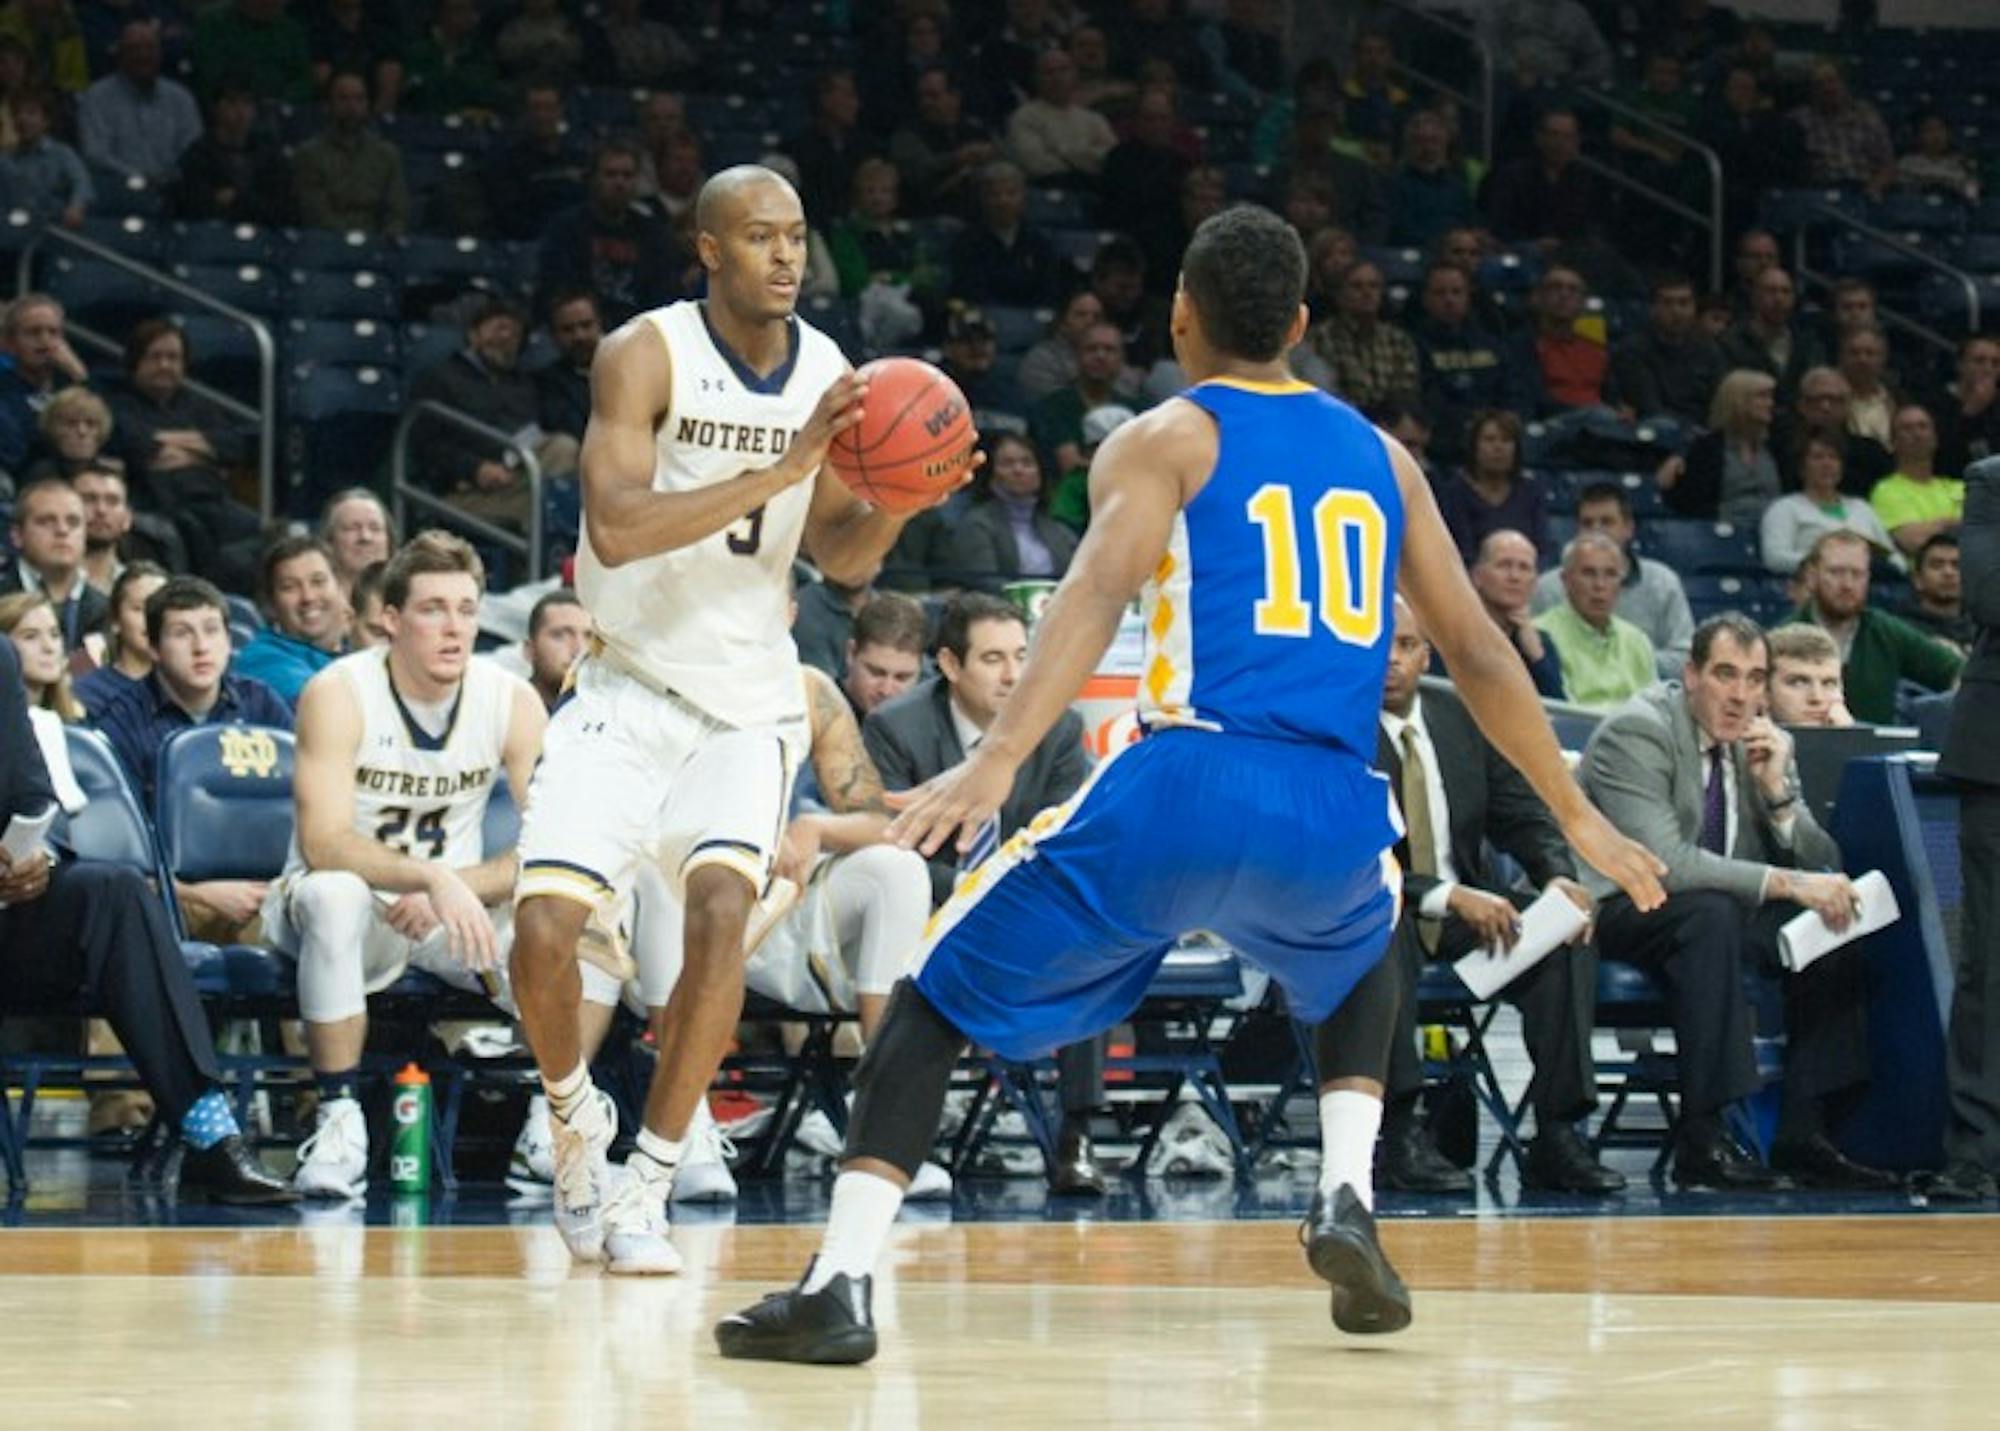 Notre Dame sophomore forward V.J. Beachem prepares to drive during Wednesday’s win over Coppin State at Purcell Pavilion.